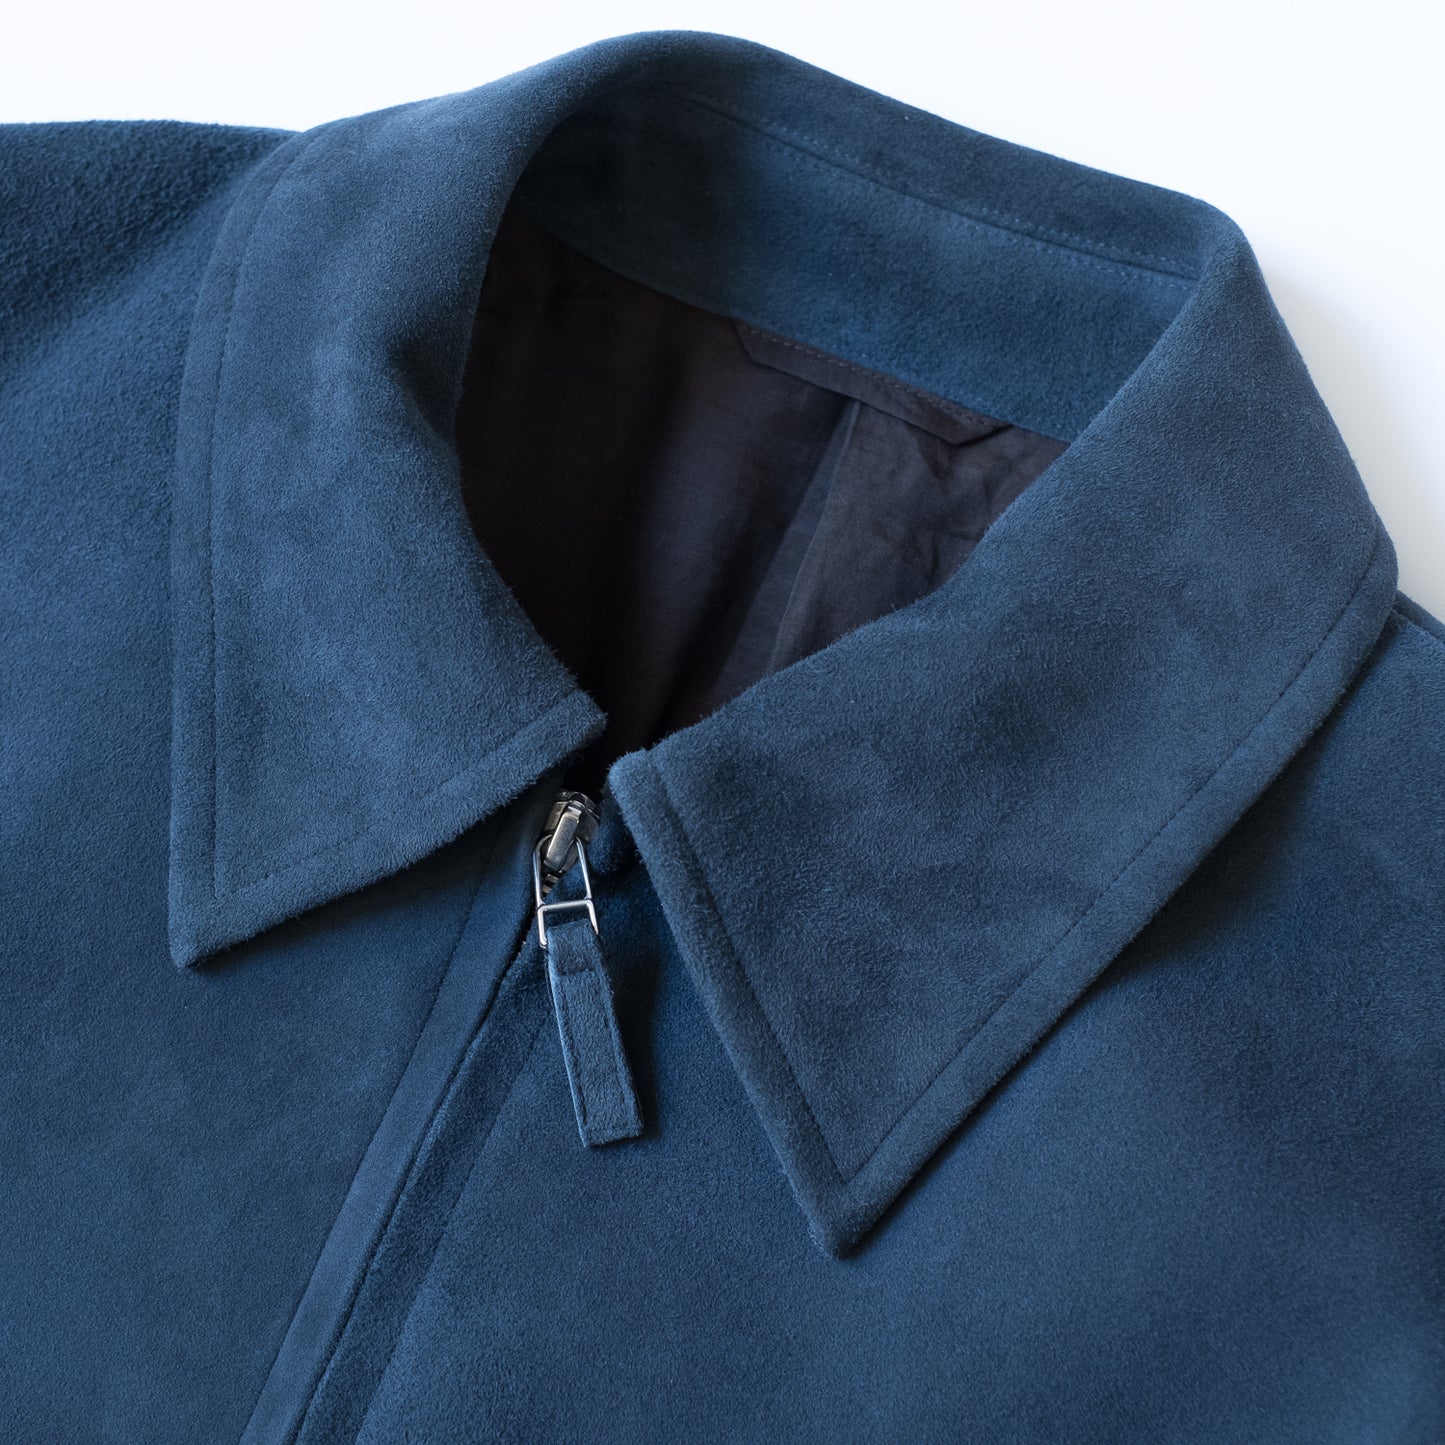 Cale SUEDE LEATHER JACKET NAVY